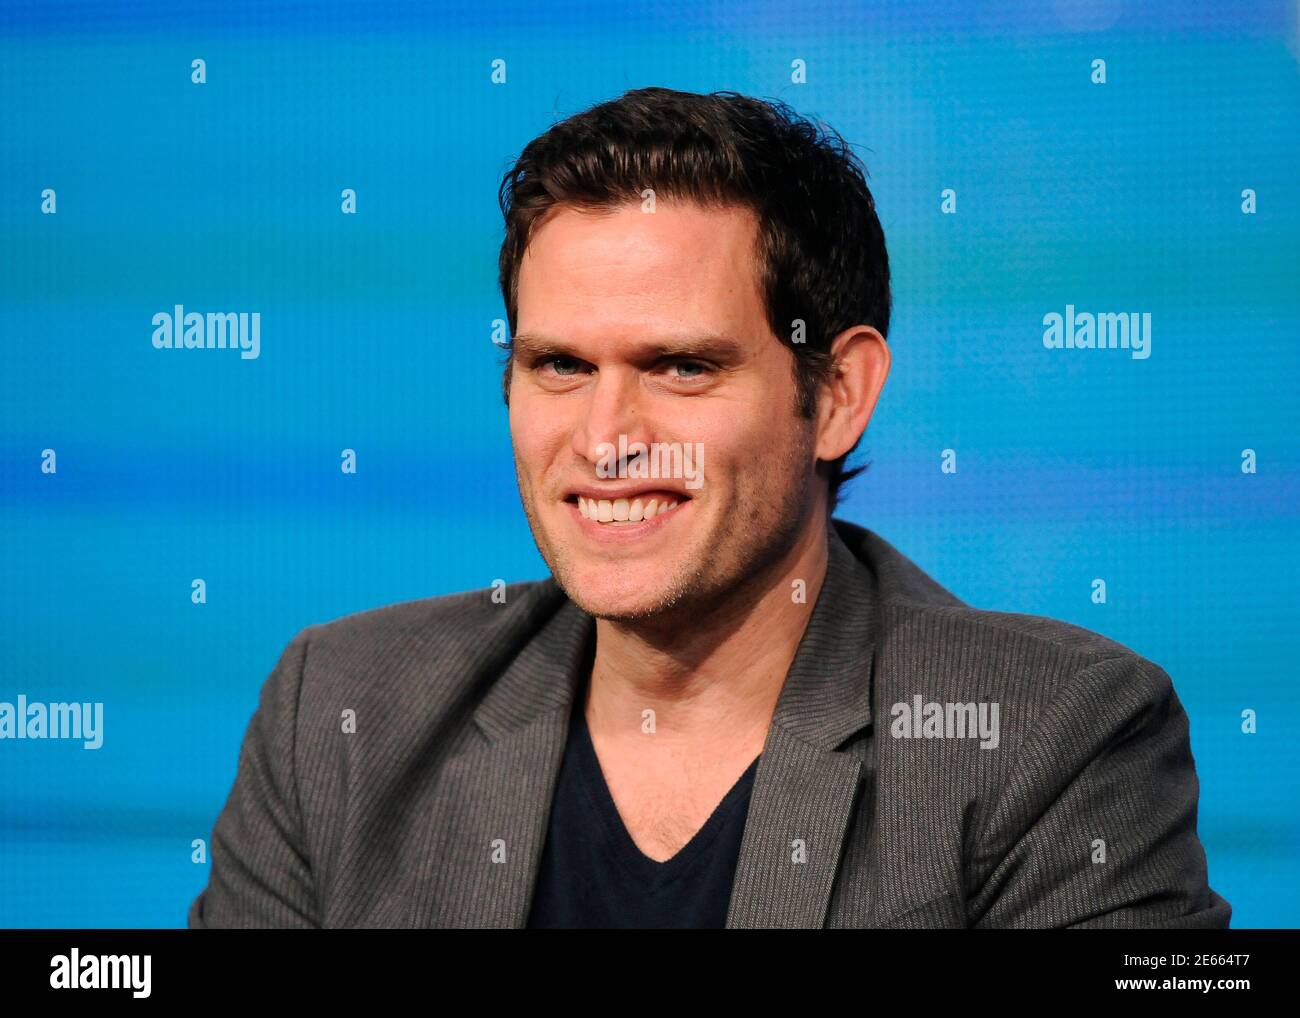 Actor Steven Pasquale takes part in a panel discussion of NBC Universal's series 'Do No Harm' during the 2013 Winter Press Tour for the Television Critics Association in Pasadena, California January 6, 2013. REUTERS/Gus Ruelas (UNITED STATES - Tags: ENTERTAINMENT) Stock Photo